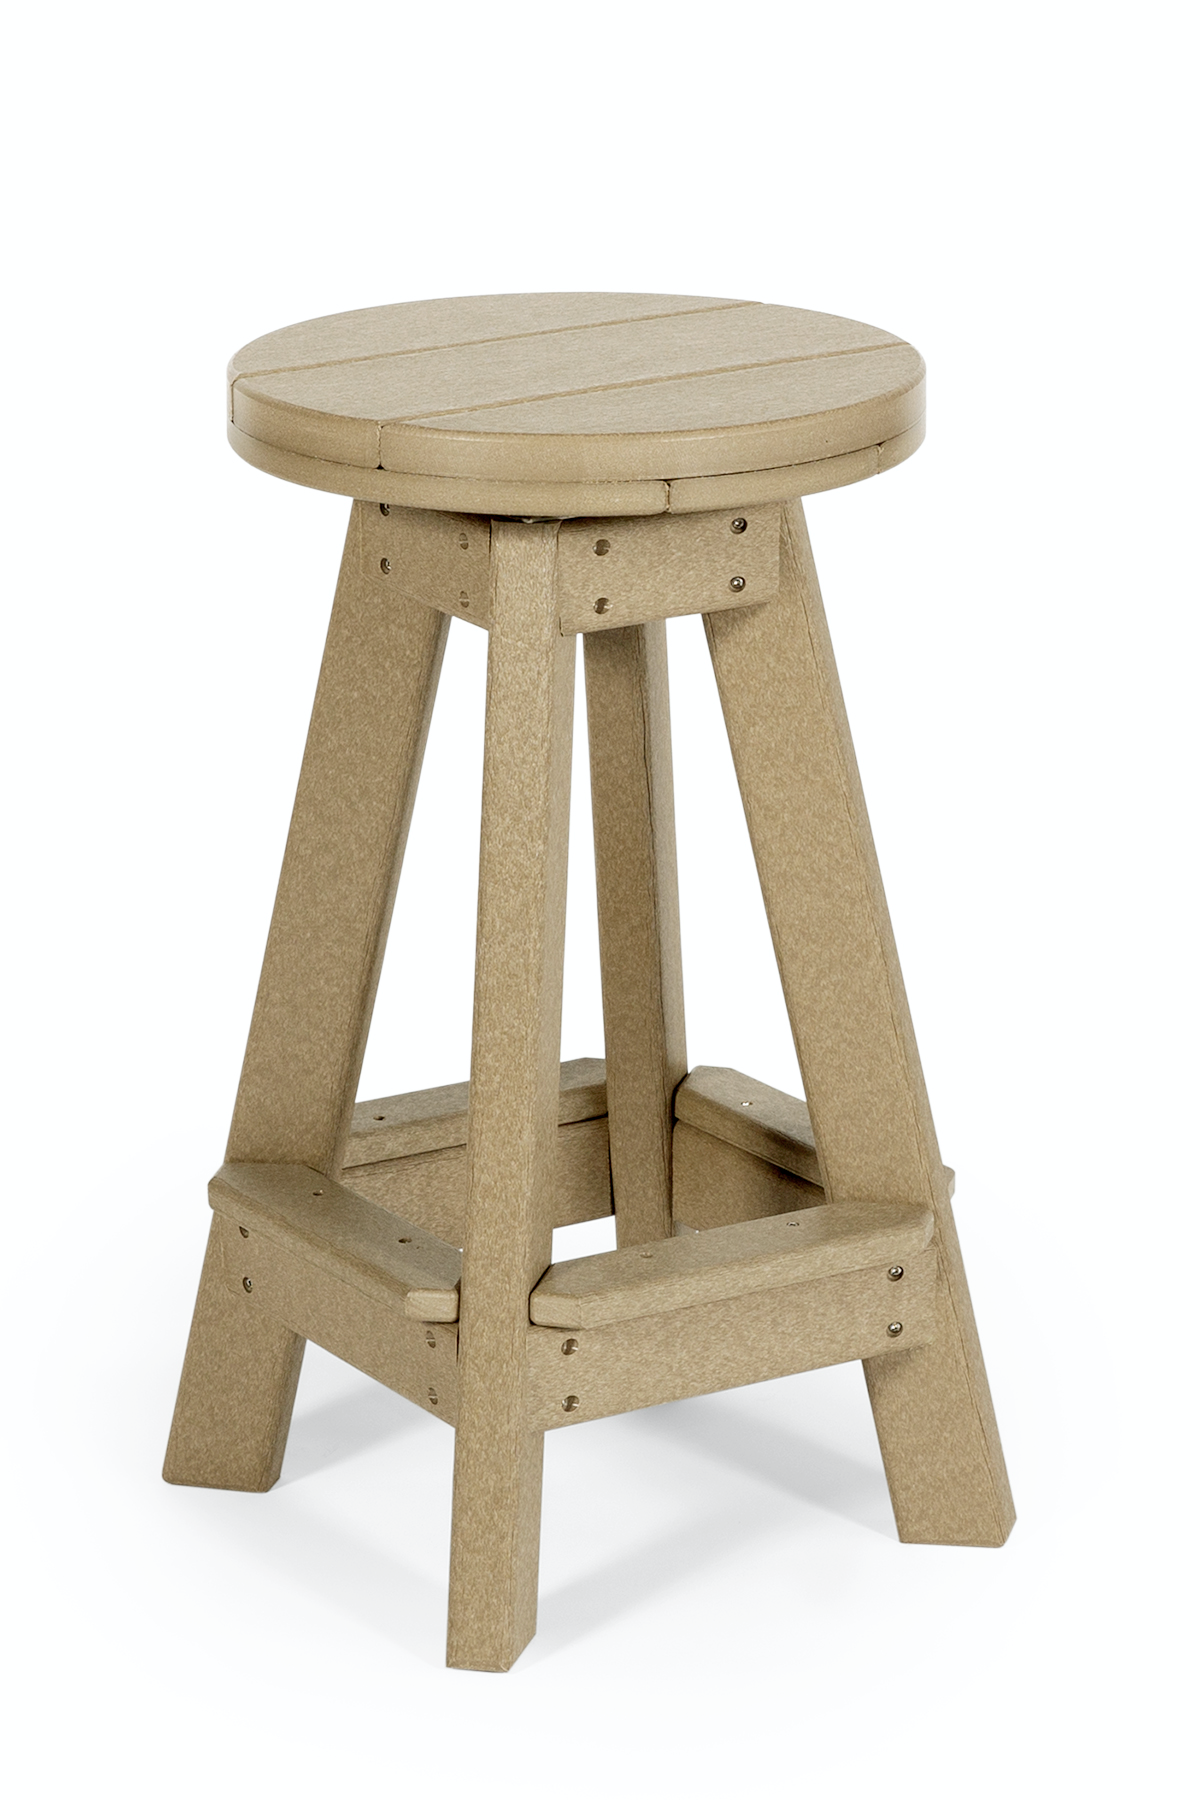 Leisure Lawns Amish Made Recycled Plastic Swivel Bar Stool Model #178 - LEAD TIME TO SHIP 4 WEEKS OR LESS